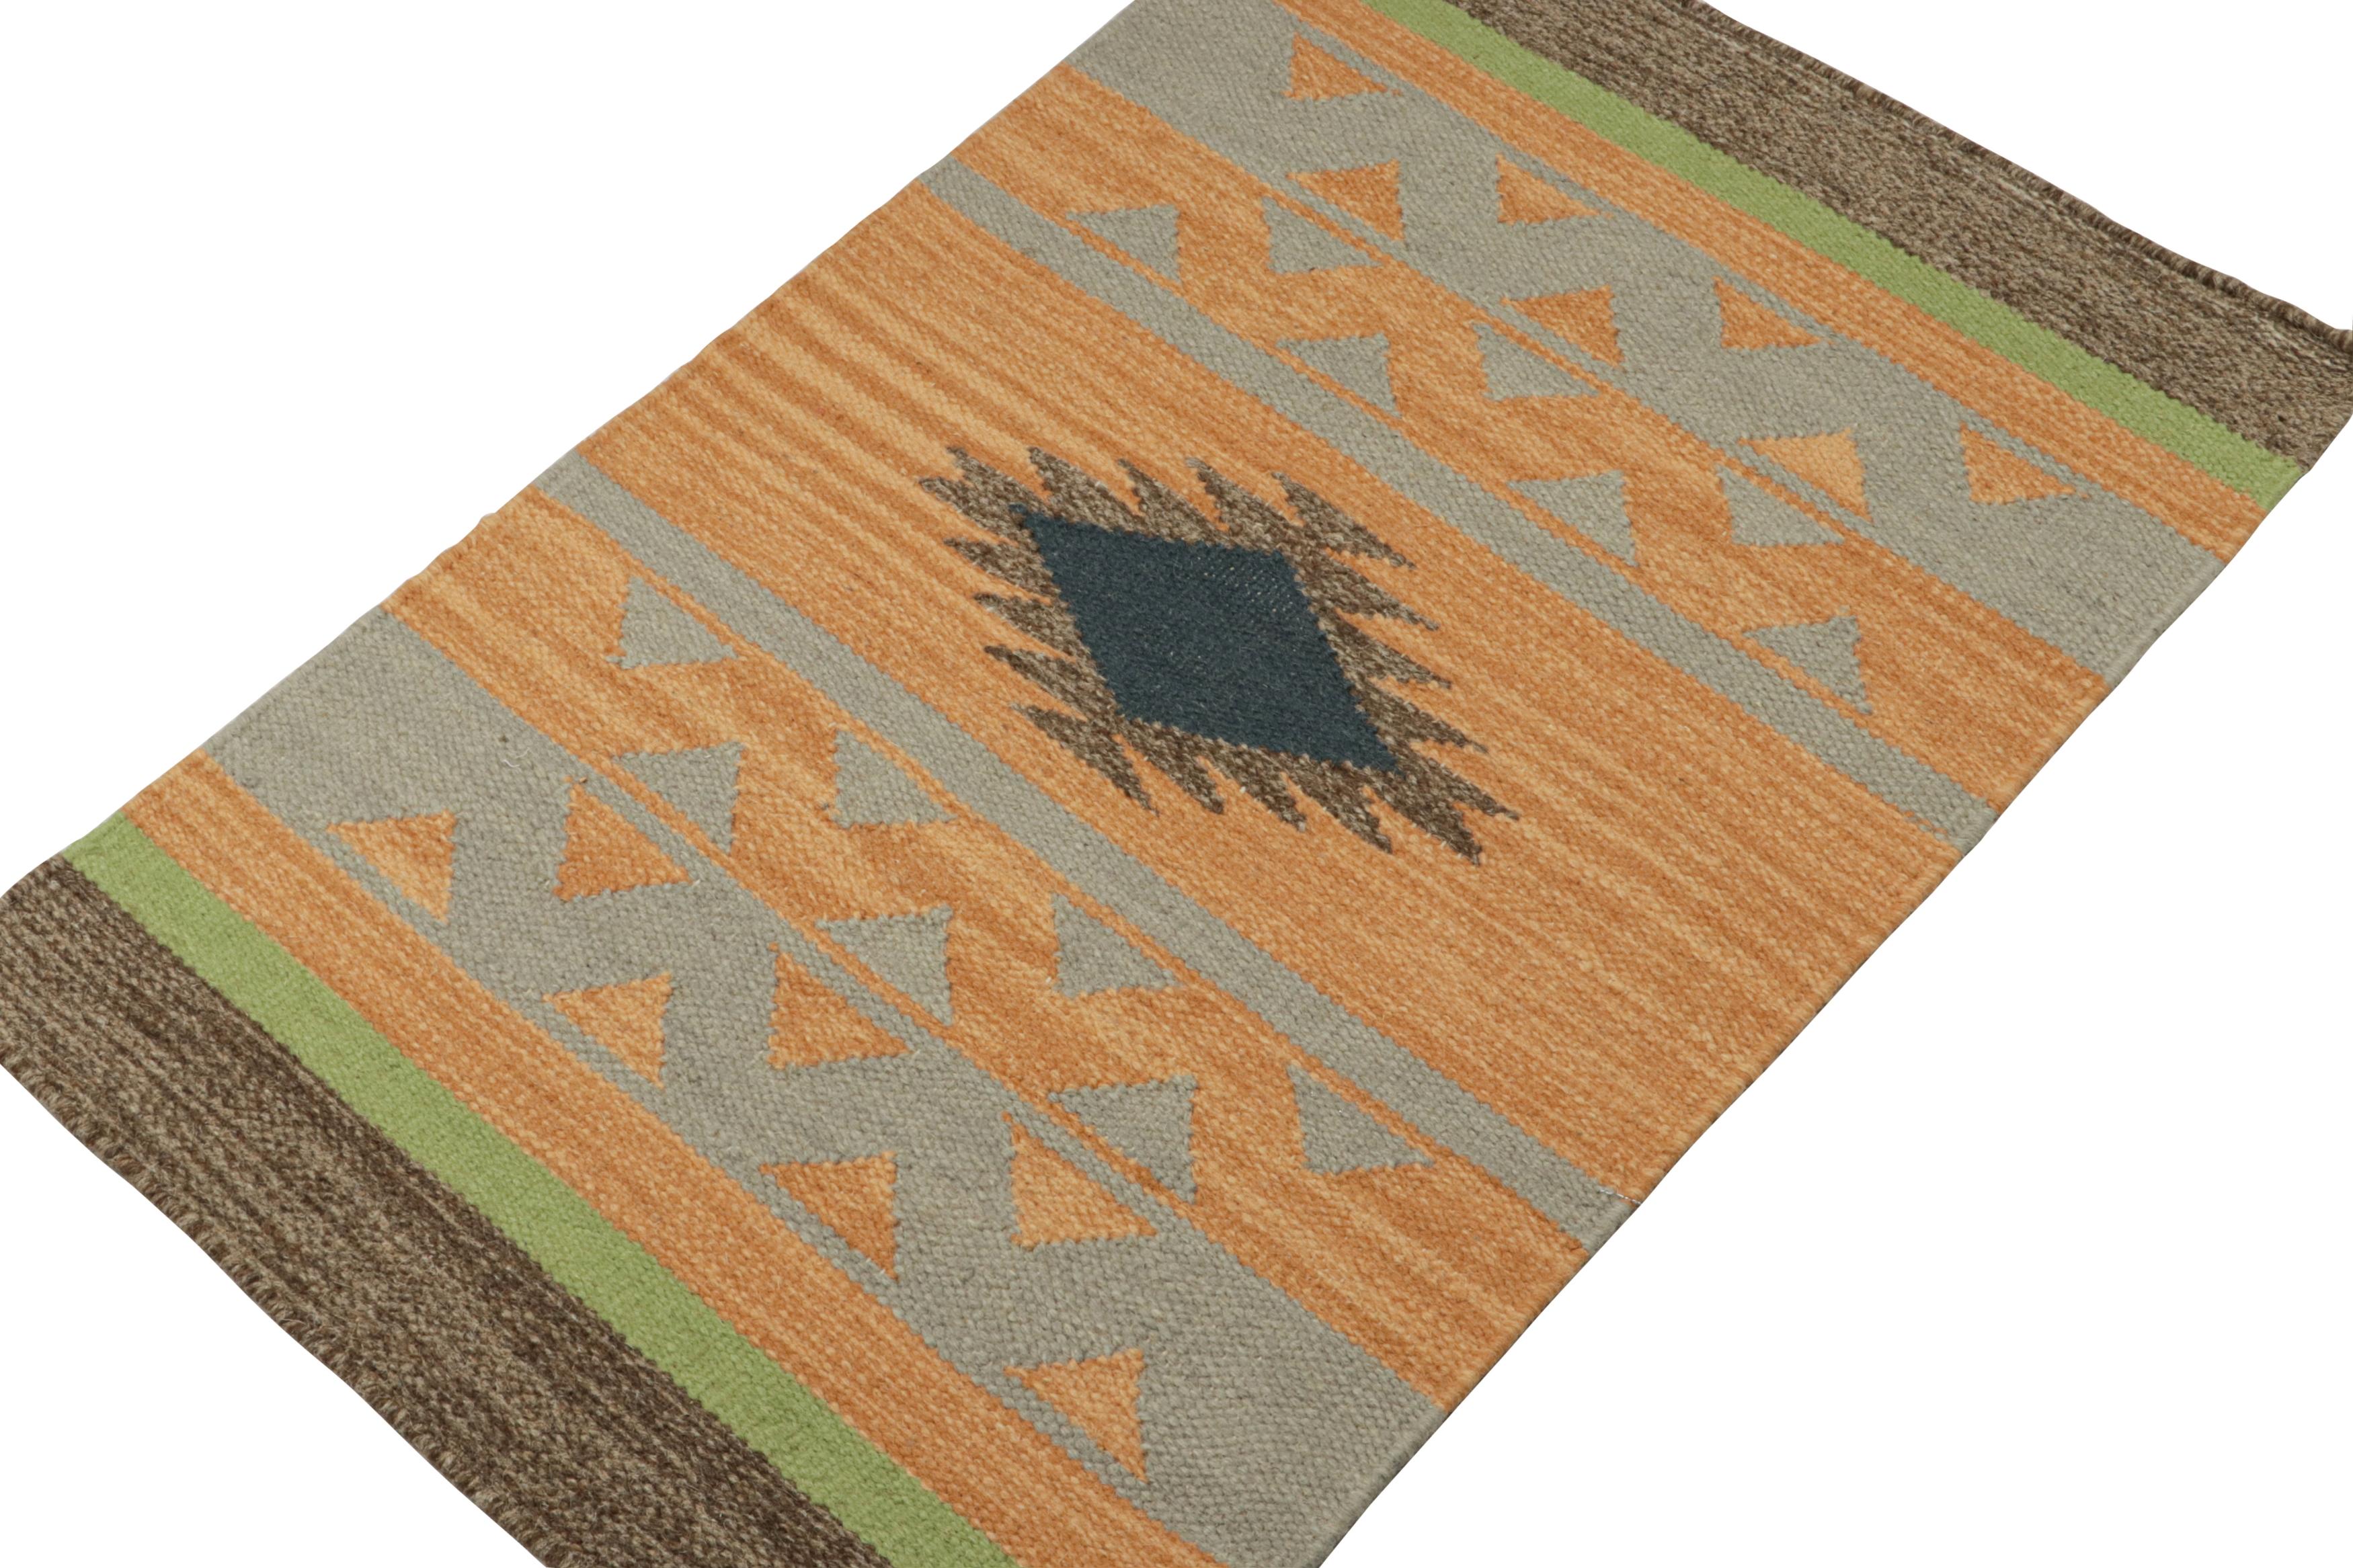 Inspired by tribal kilims, this 2x3 piece is a vibrant new addition to the flatweave collection by Rug & Kilim.  

On the Design: 

Handwoven in wool, this contemporary kilim carries grey, black, brown & green geometric patterns on gold. Further